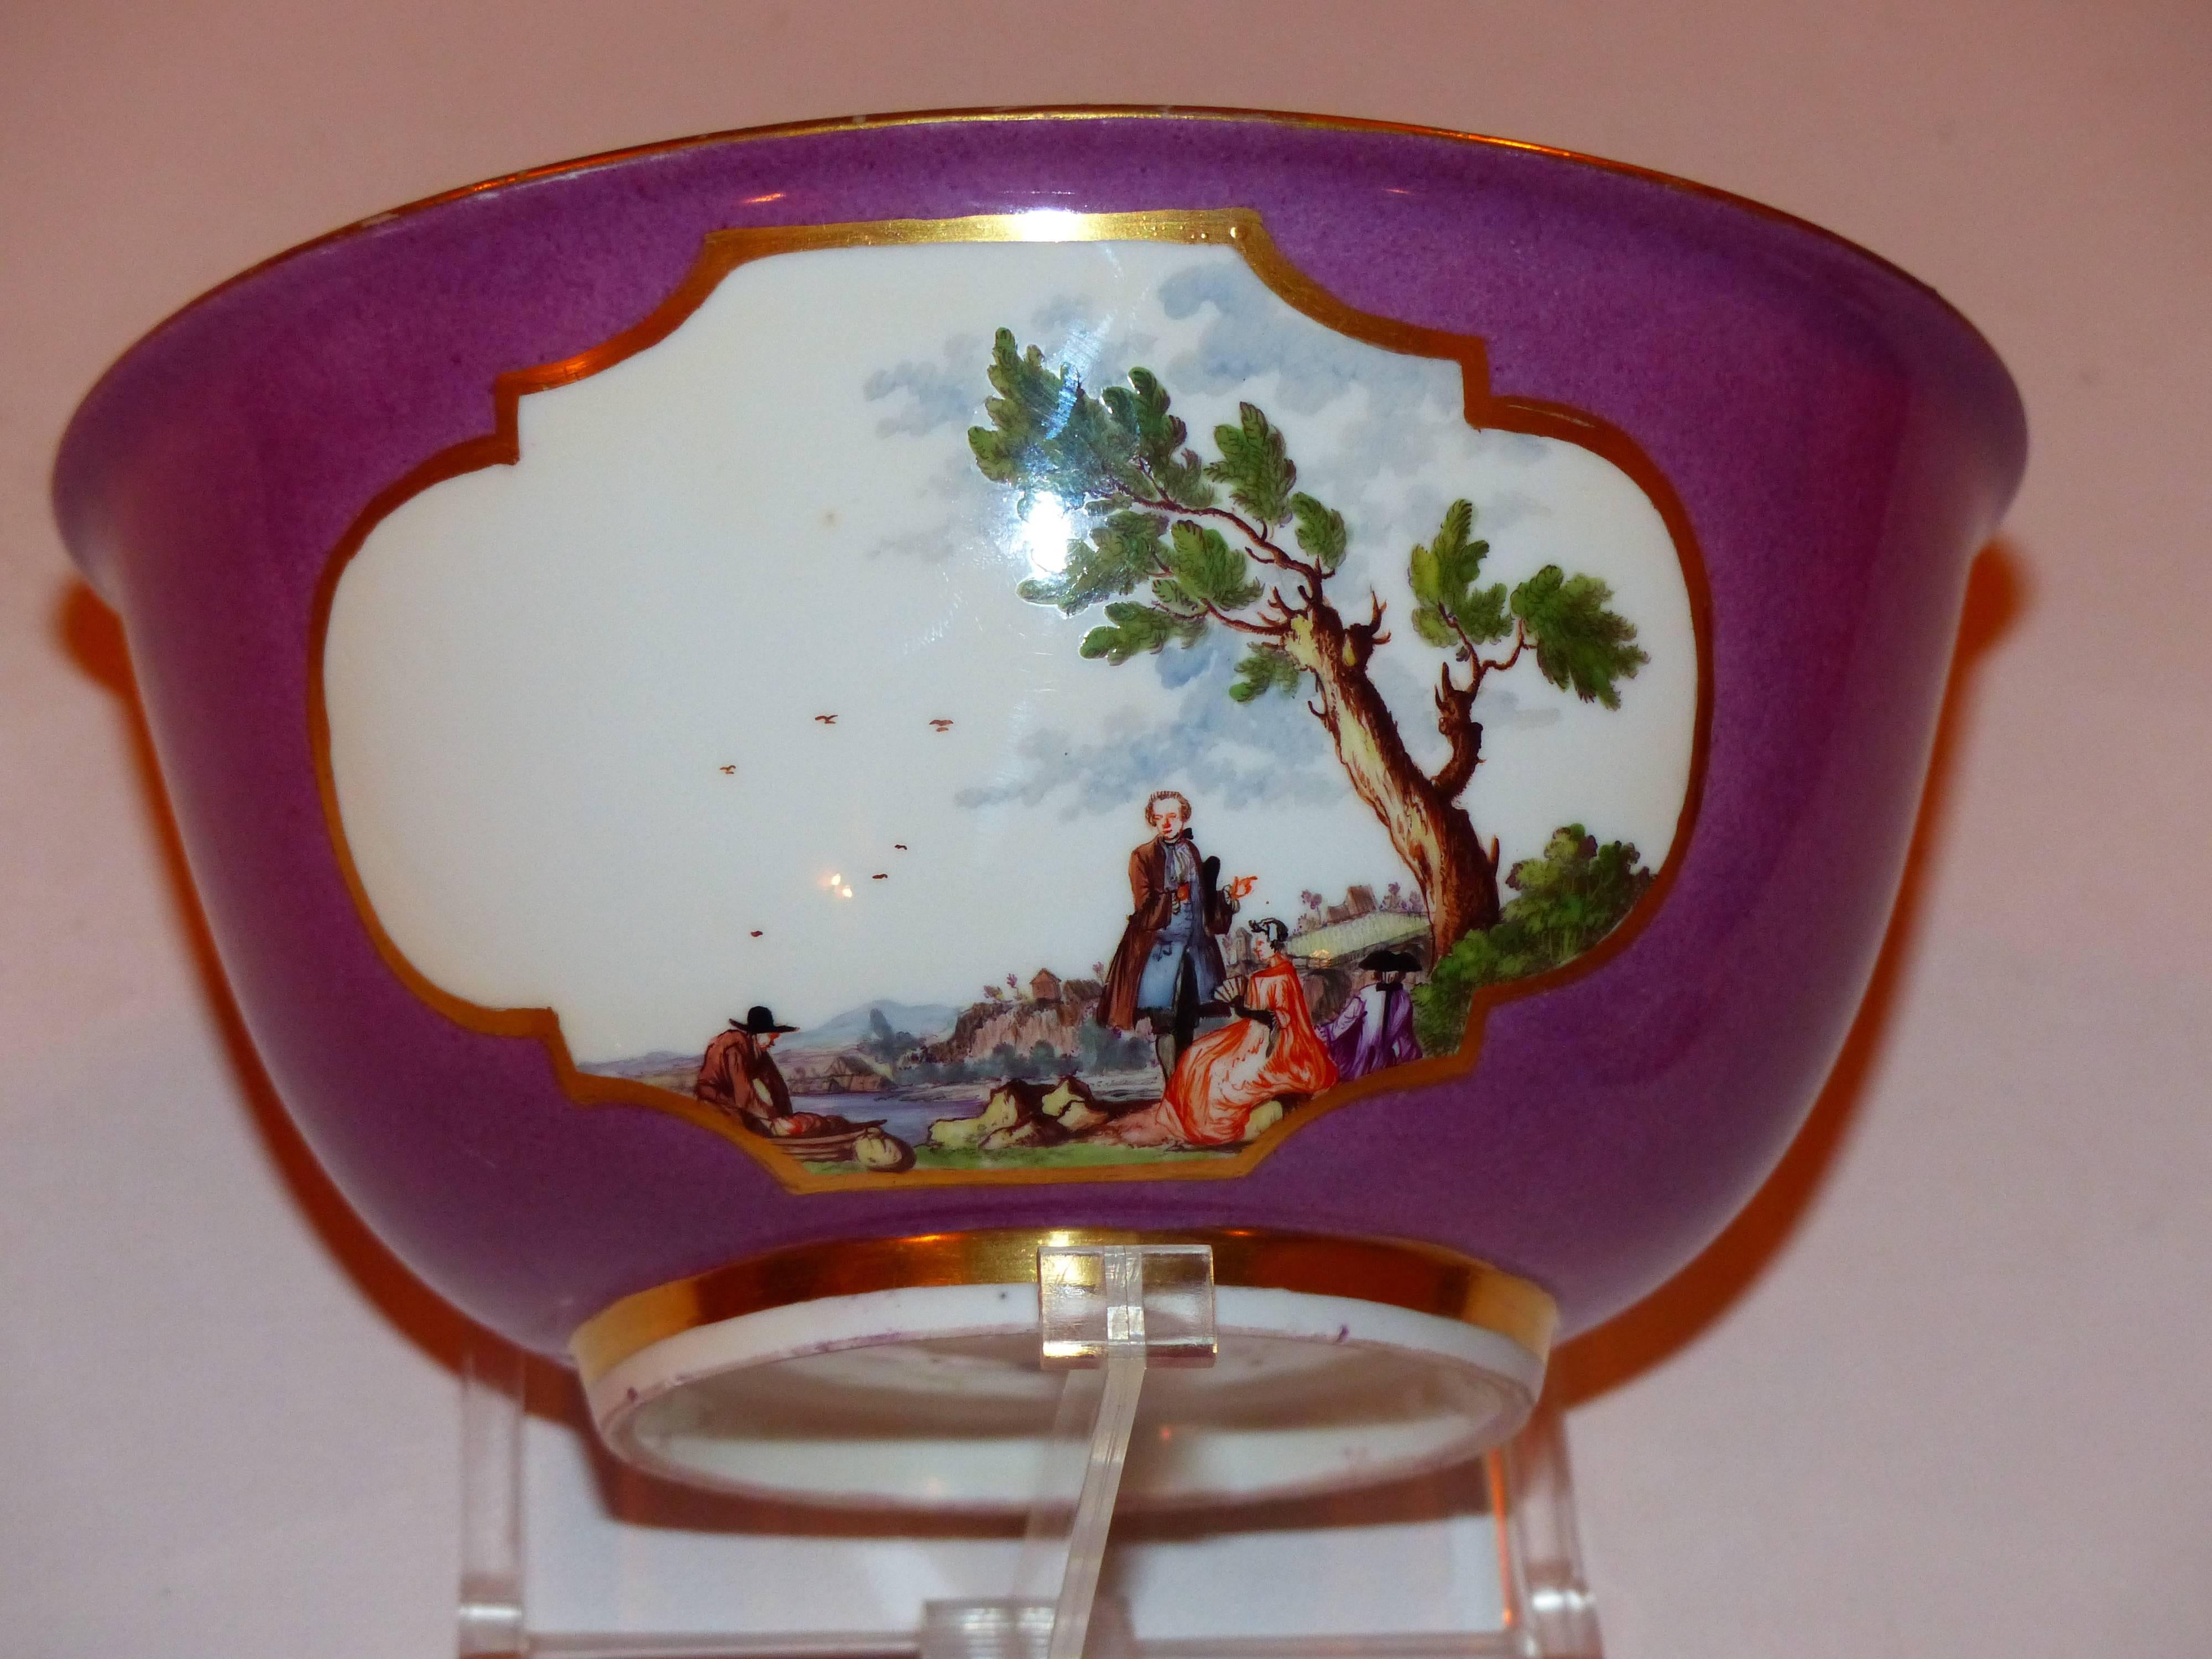 Gilt Exclusive Antique Meissen Service by Christian F. Herold, 1735-1740, Rare For Sale